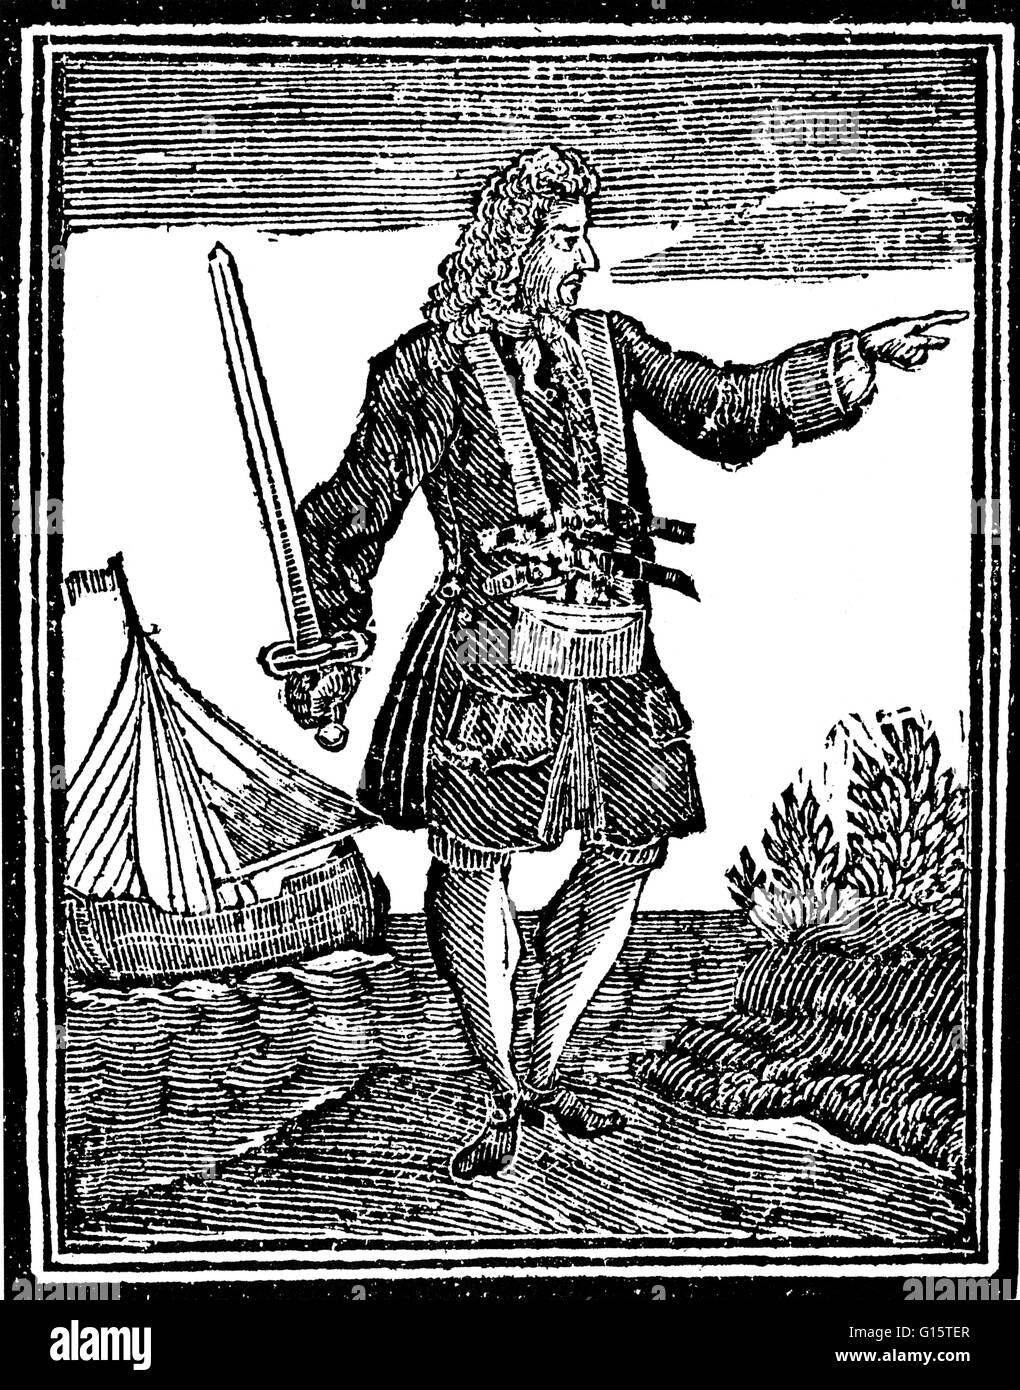 Charles Vane (1680 - March 29, 1721) was an English pirate who preyed upon English and French shipping. His pirate career lasted from 1716 - 1719. He was among the pirate captains who operated out of the notorious base at New Providence in the Bahamas aft Stock Photo